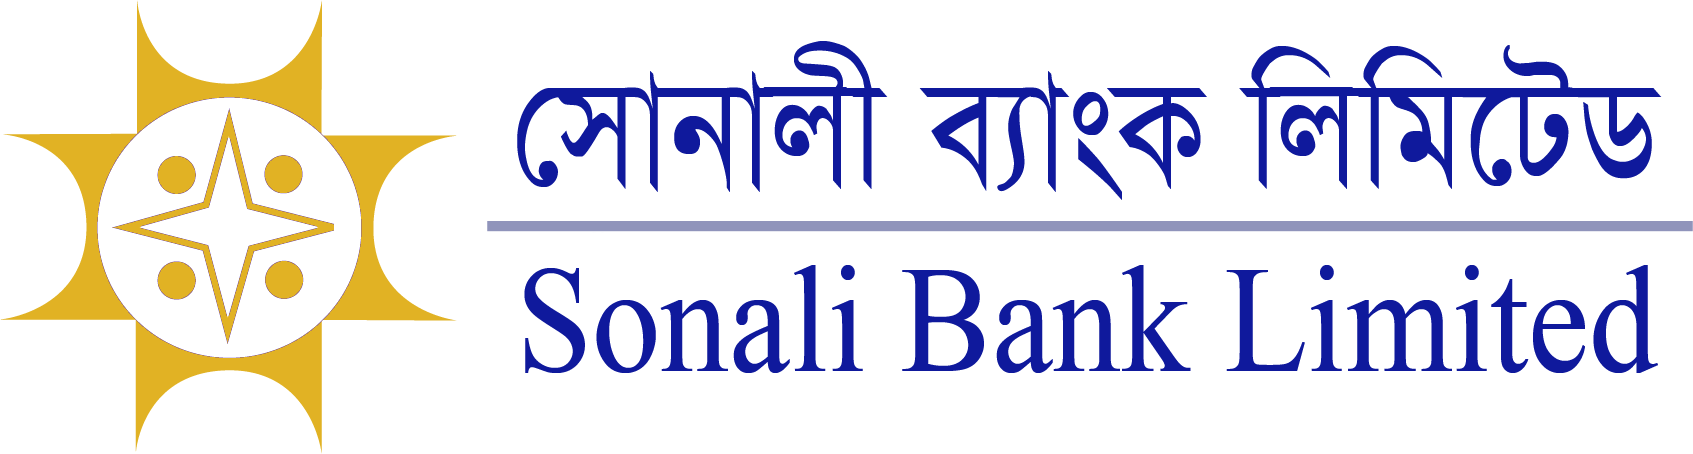 Queue Management System has been implemented in Sonali Bank Limited